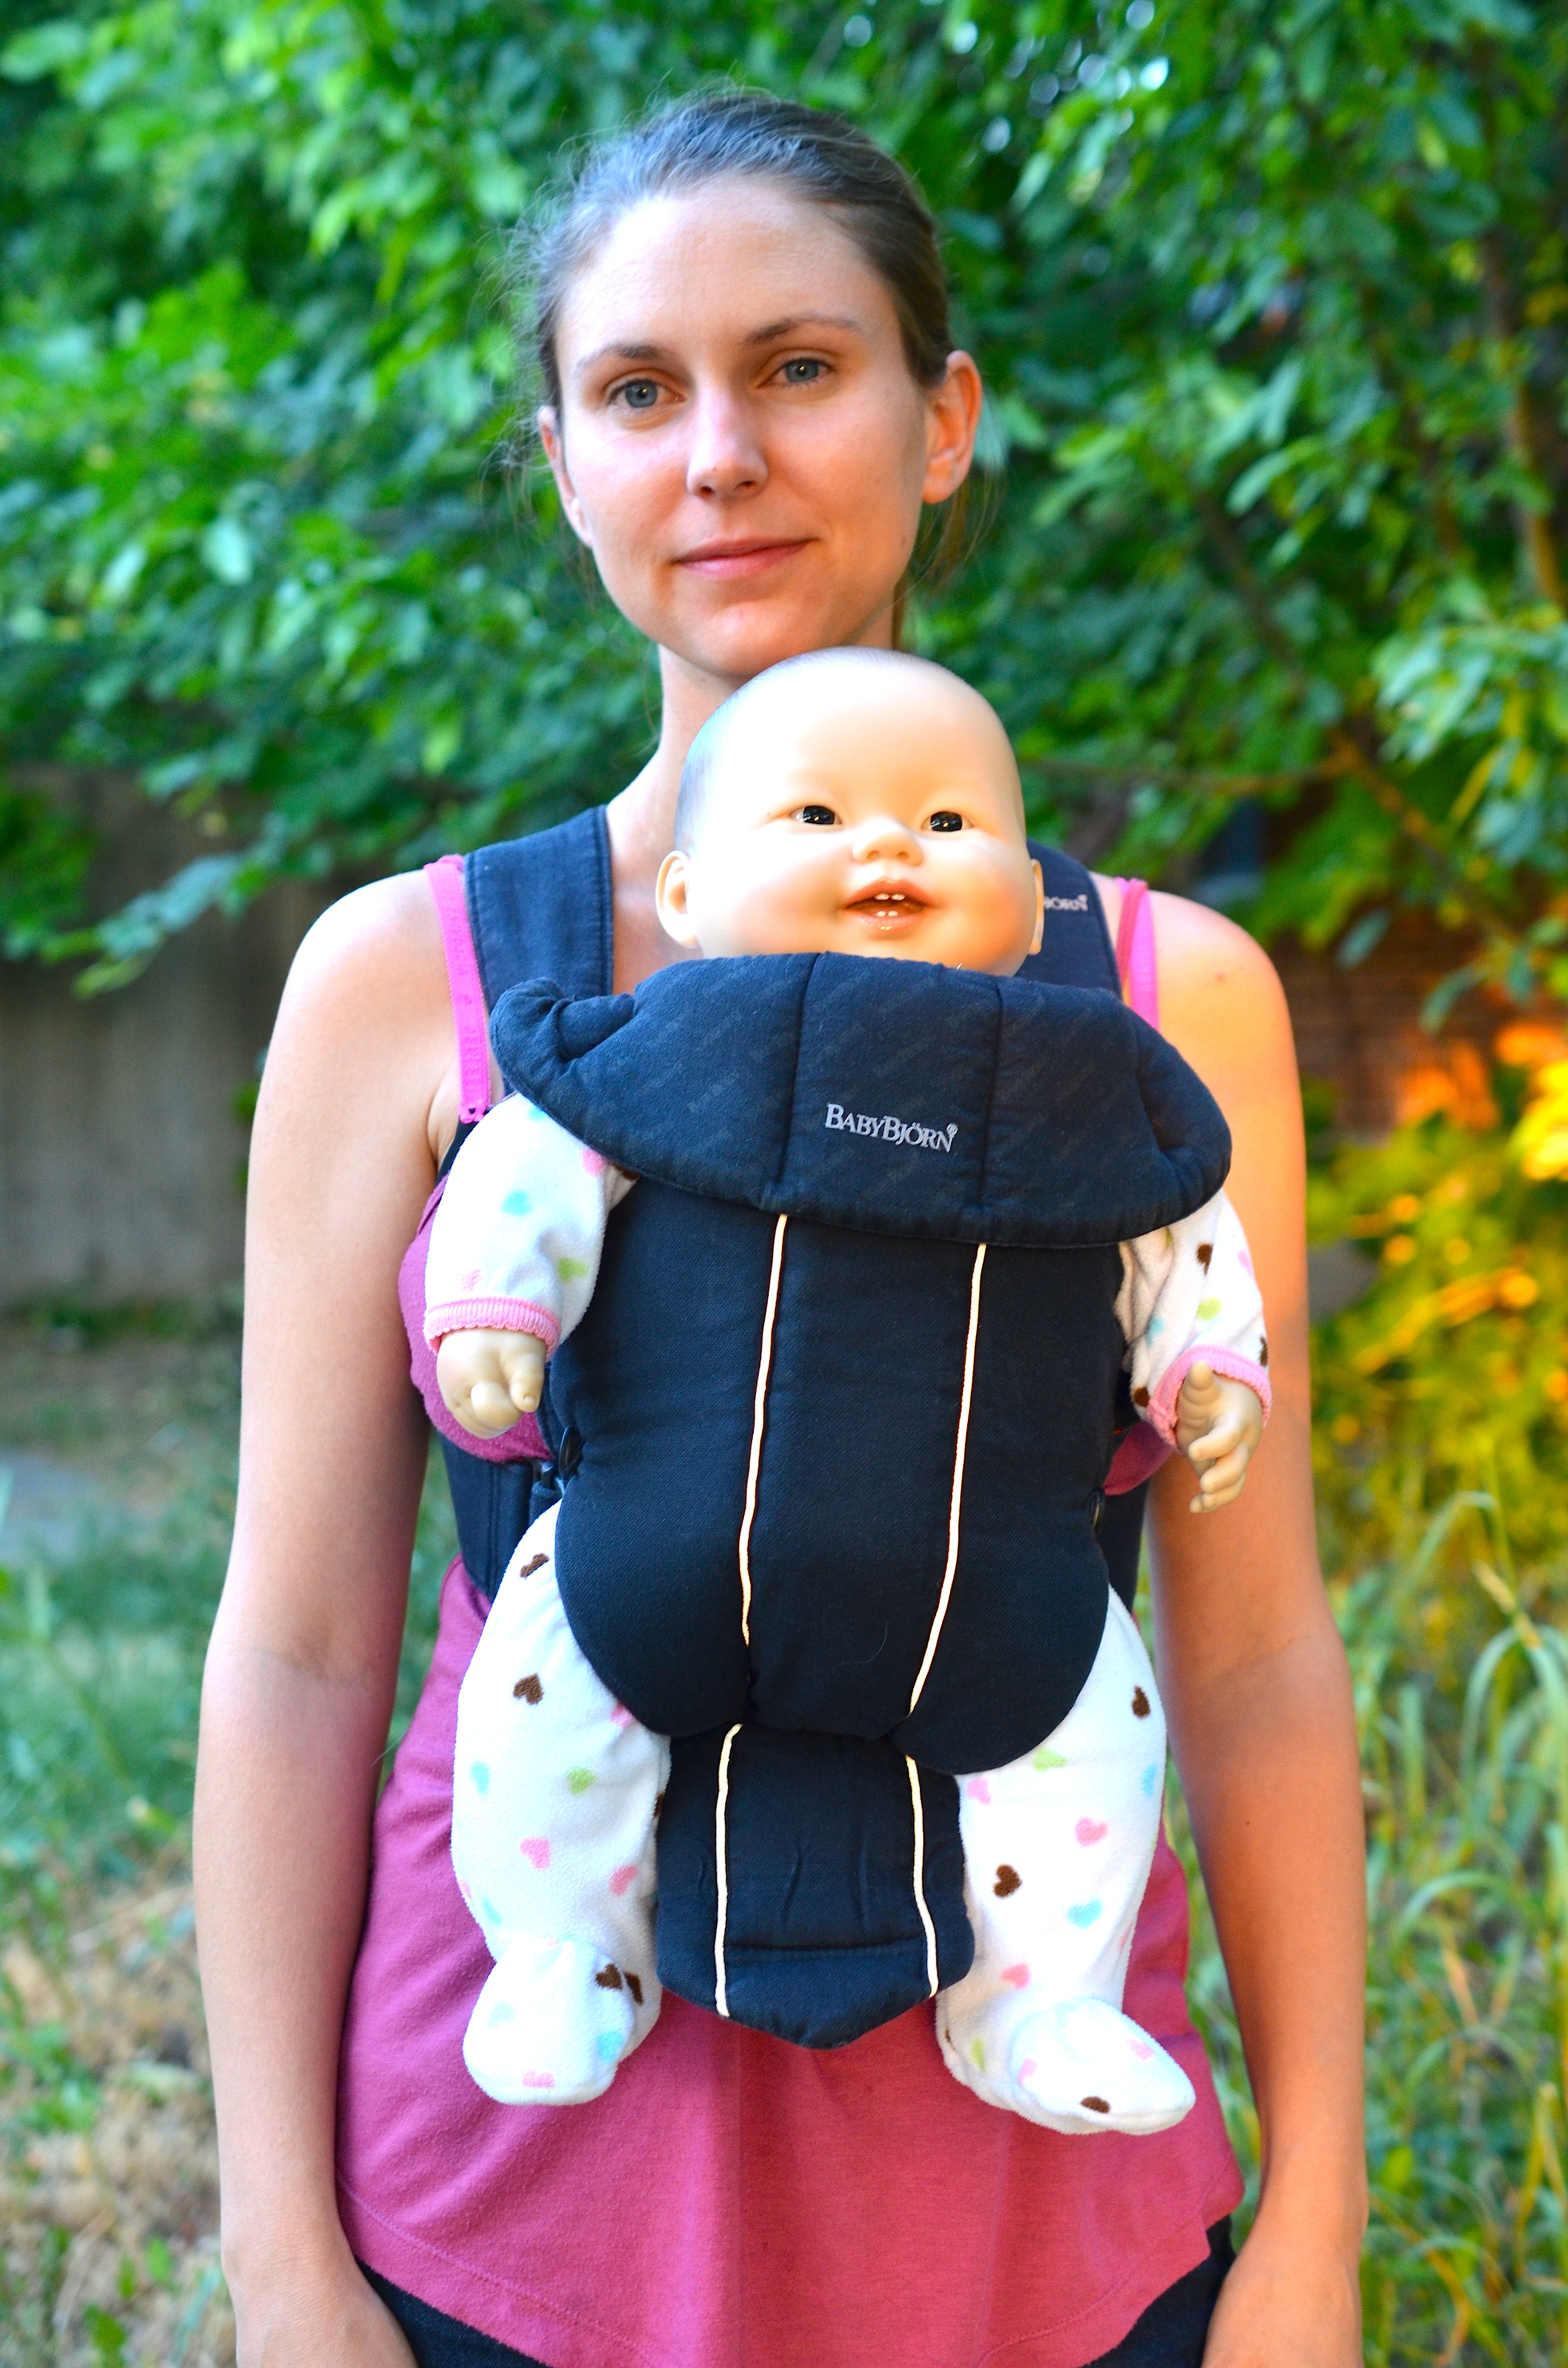 baby carrier | The Greatest Bond